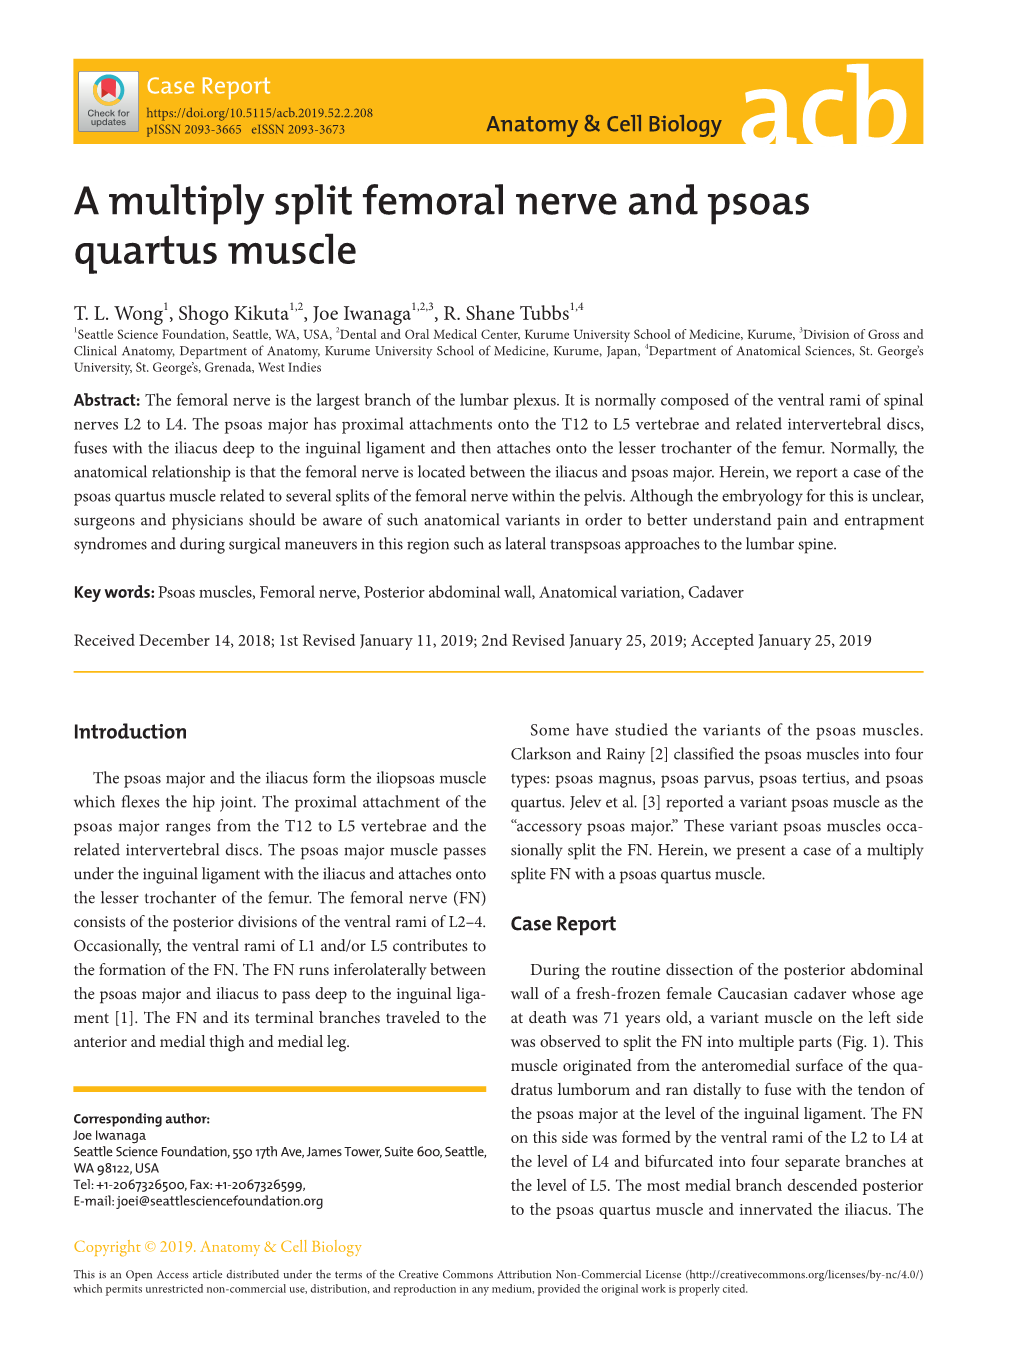 A Multiply Split Femoral Nerve and Psoas Quartus Muscle